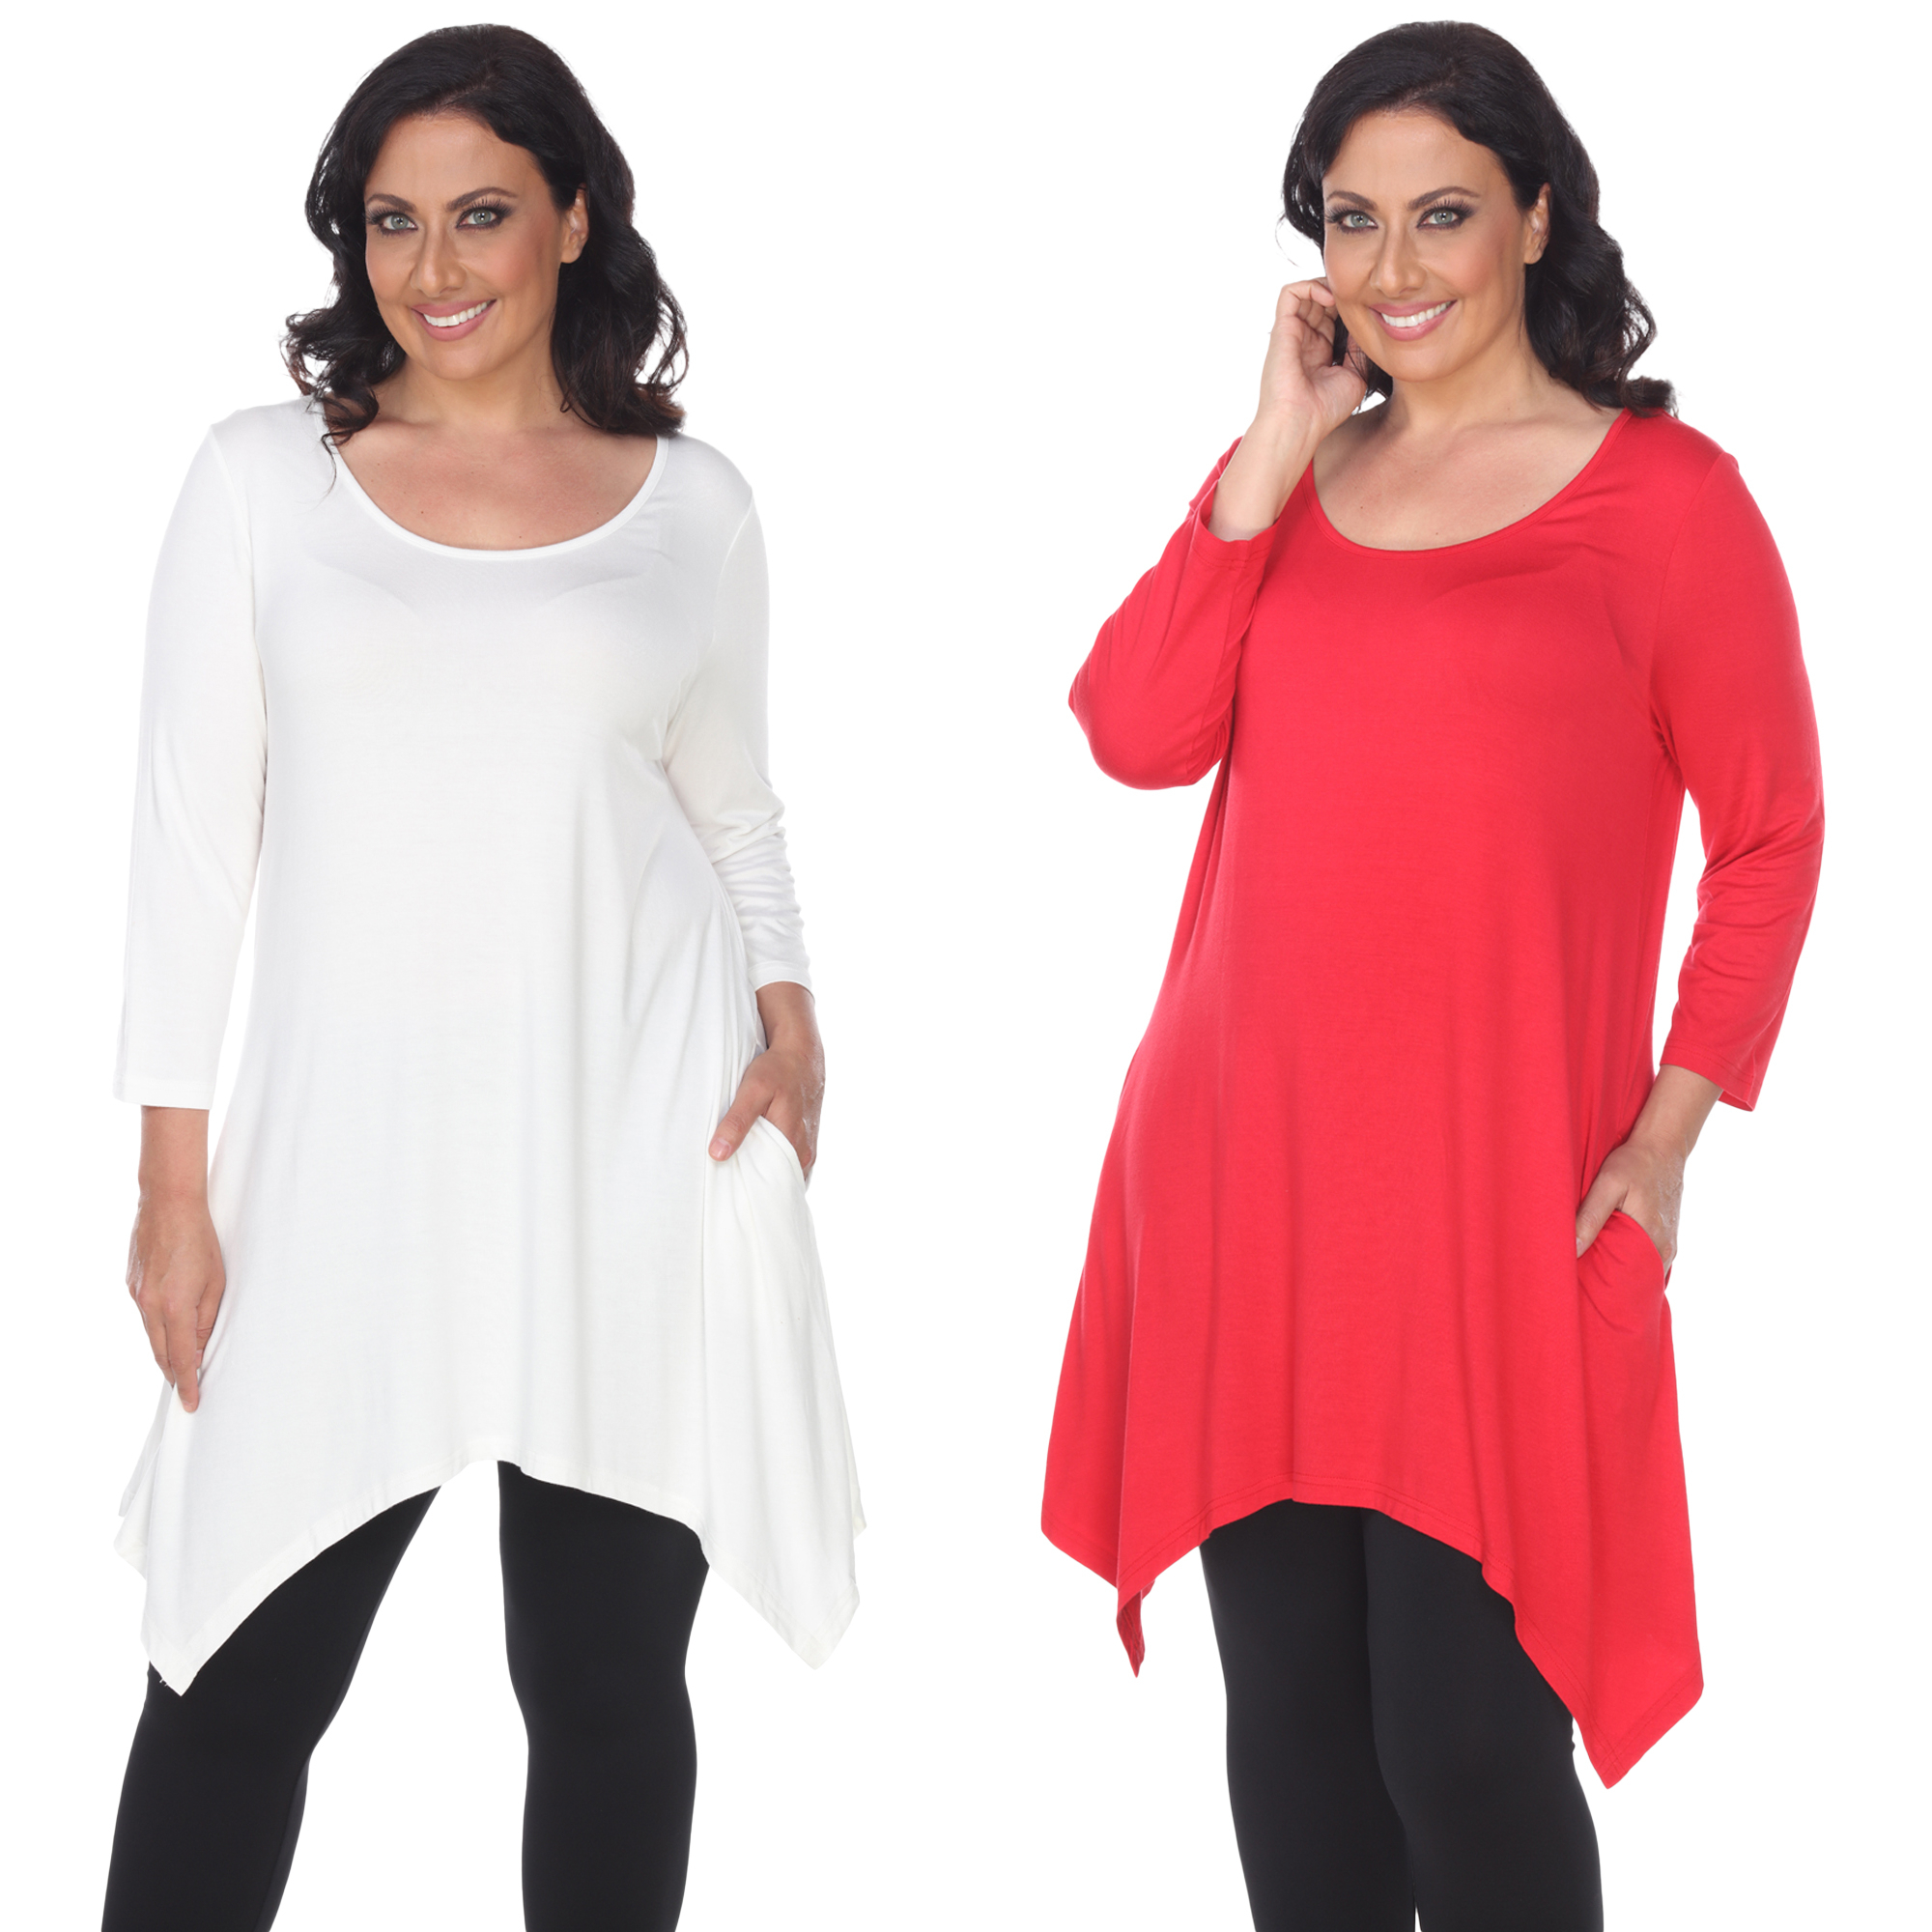 White Mark Women's Pack Of 2 White Tunic Top - White, Coral, X-Large